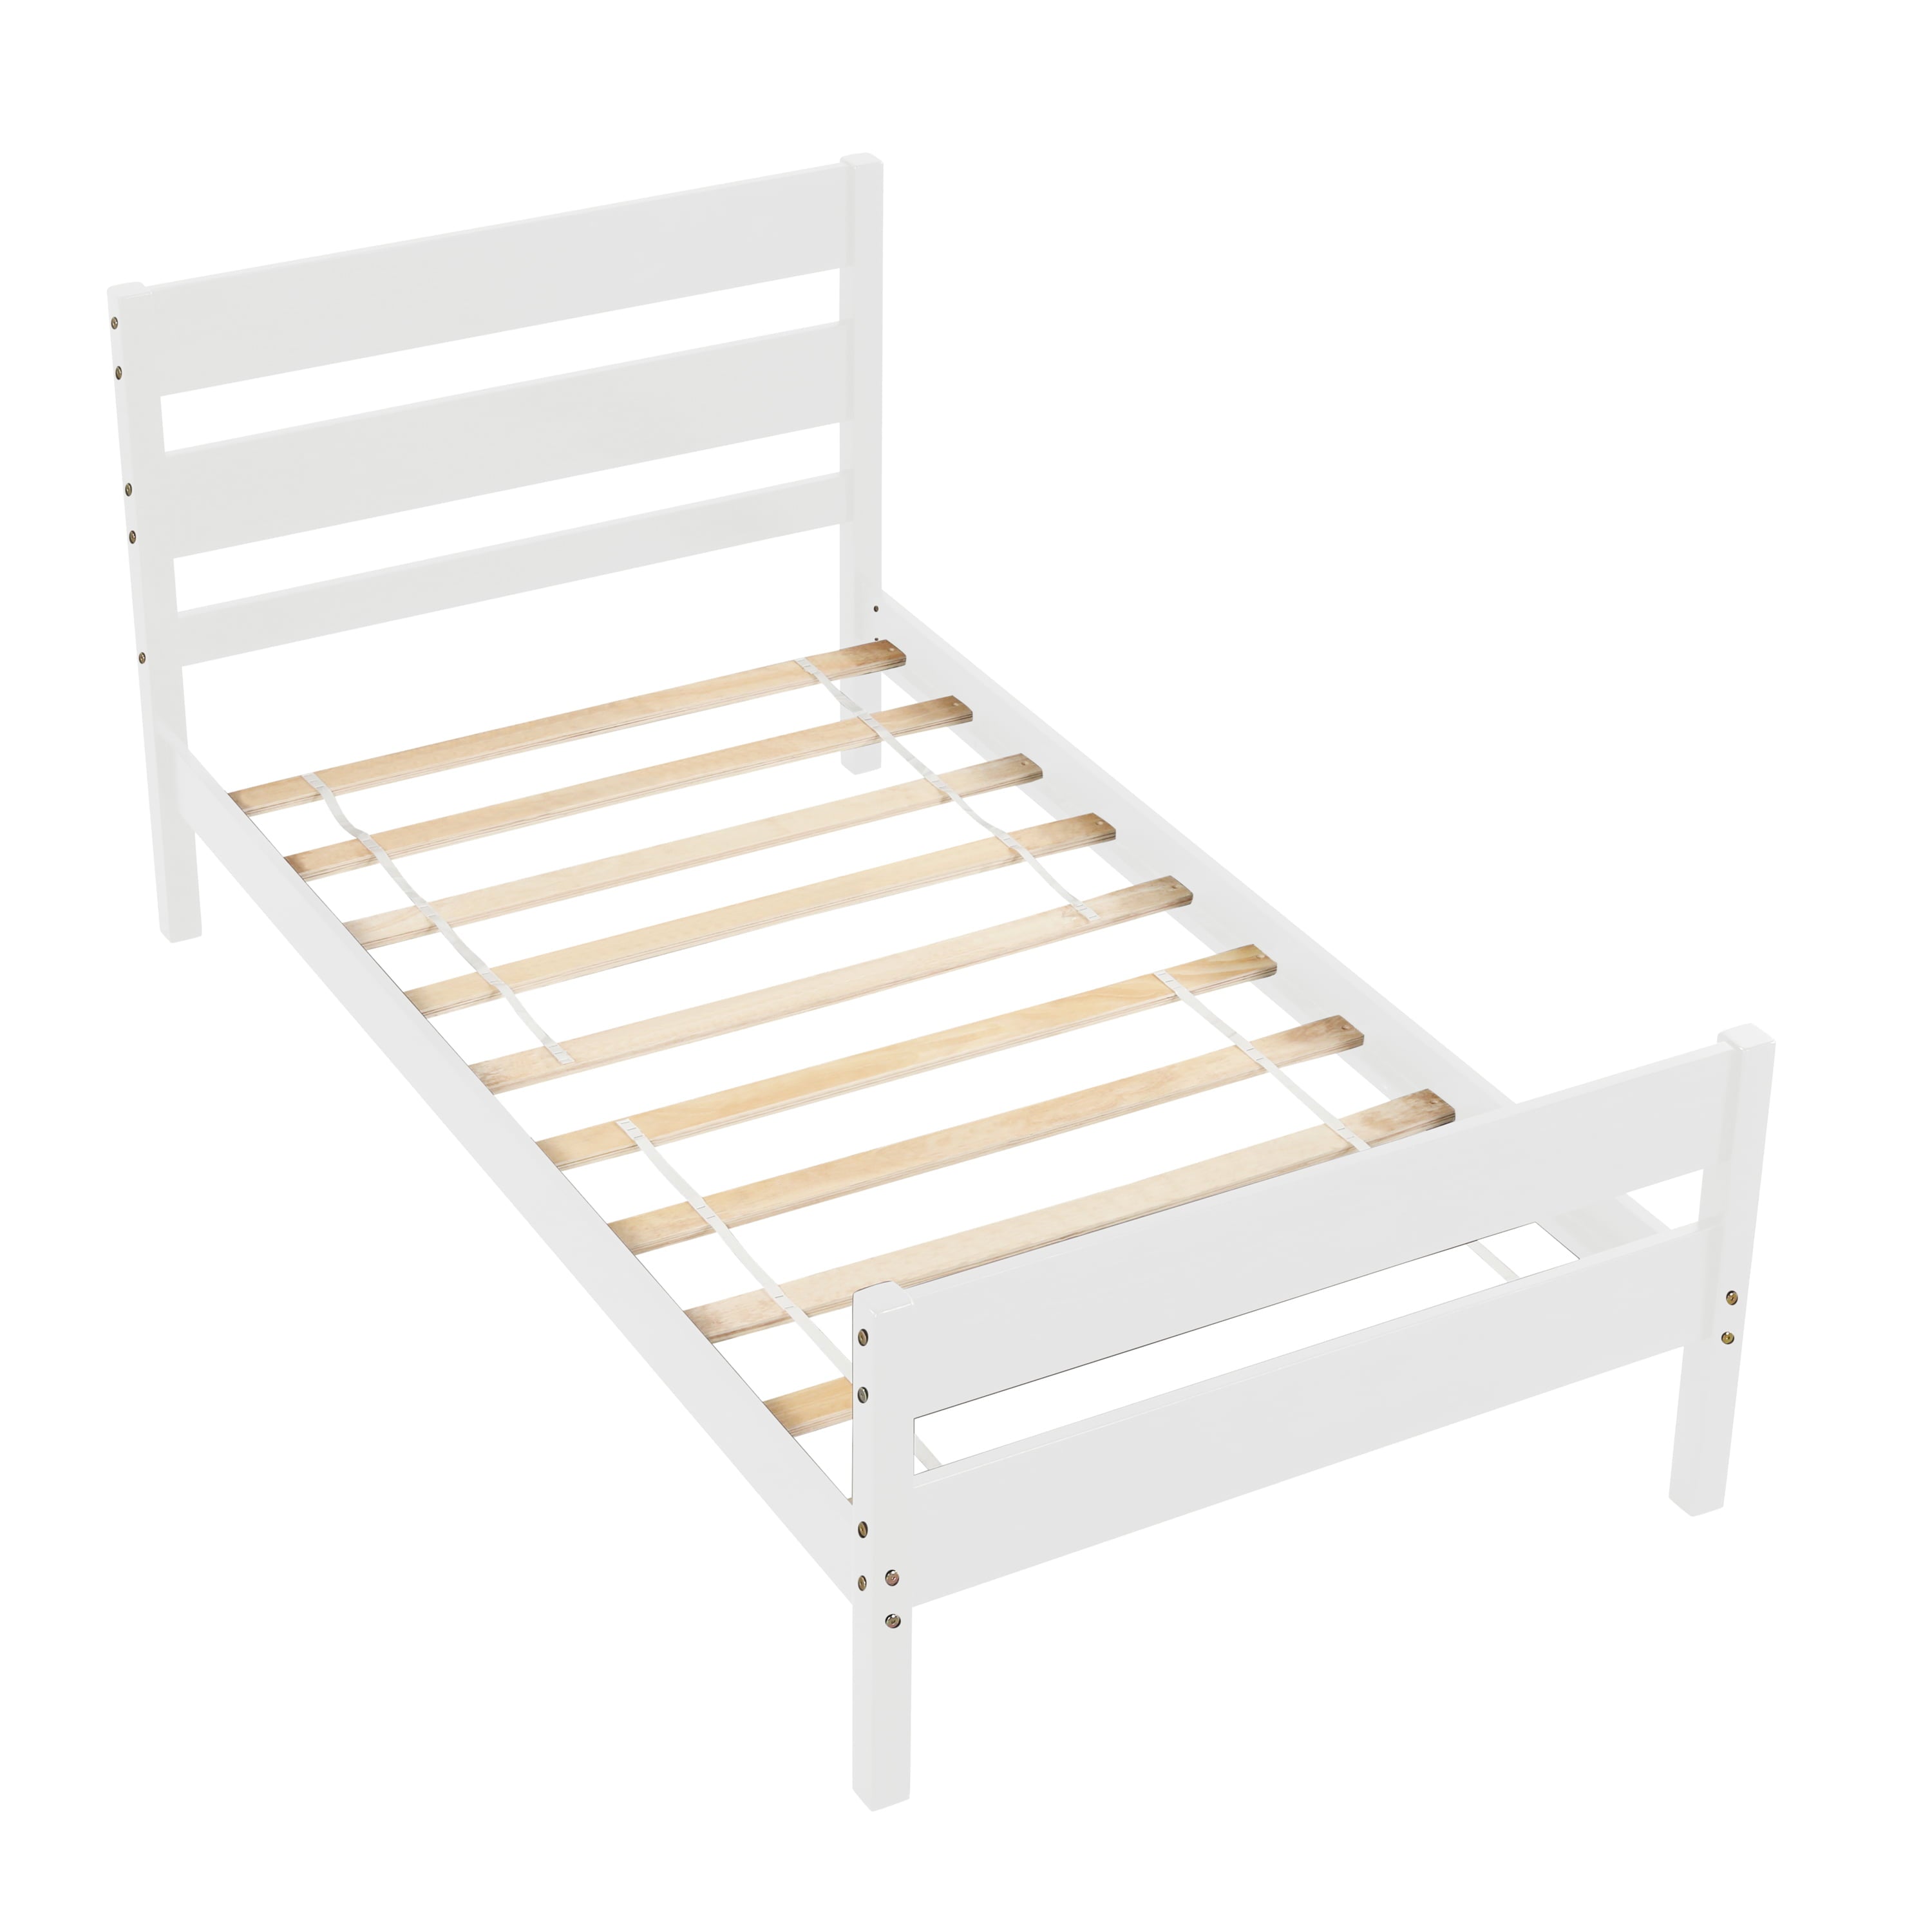 BTMWAY Wood Twin Bed Frame for Kids Adults, Solid Wood Platform Bed Frame with Headboard and Footboard, Modern Twin Size Bed Frame with Wooden Slats Support, No Box Spring Needed, White